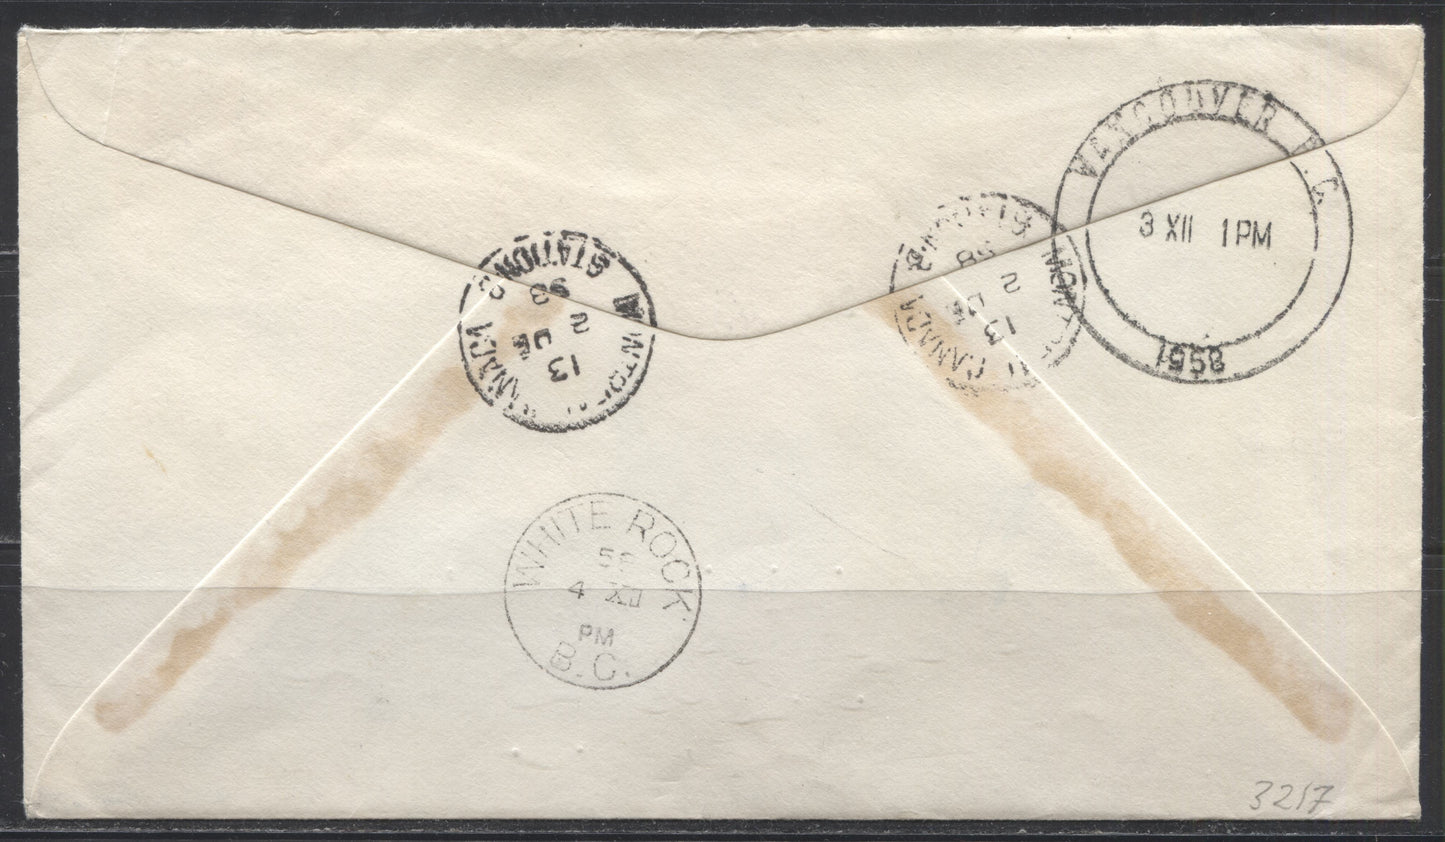 1958 Domestic Registered Cover From Montreal to White Rock, BC, Franked With 1958 Commemoratives